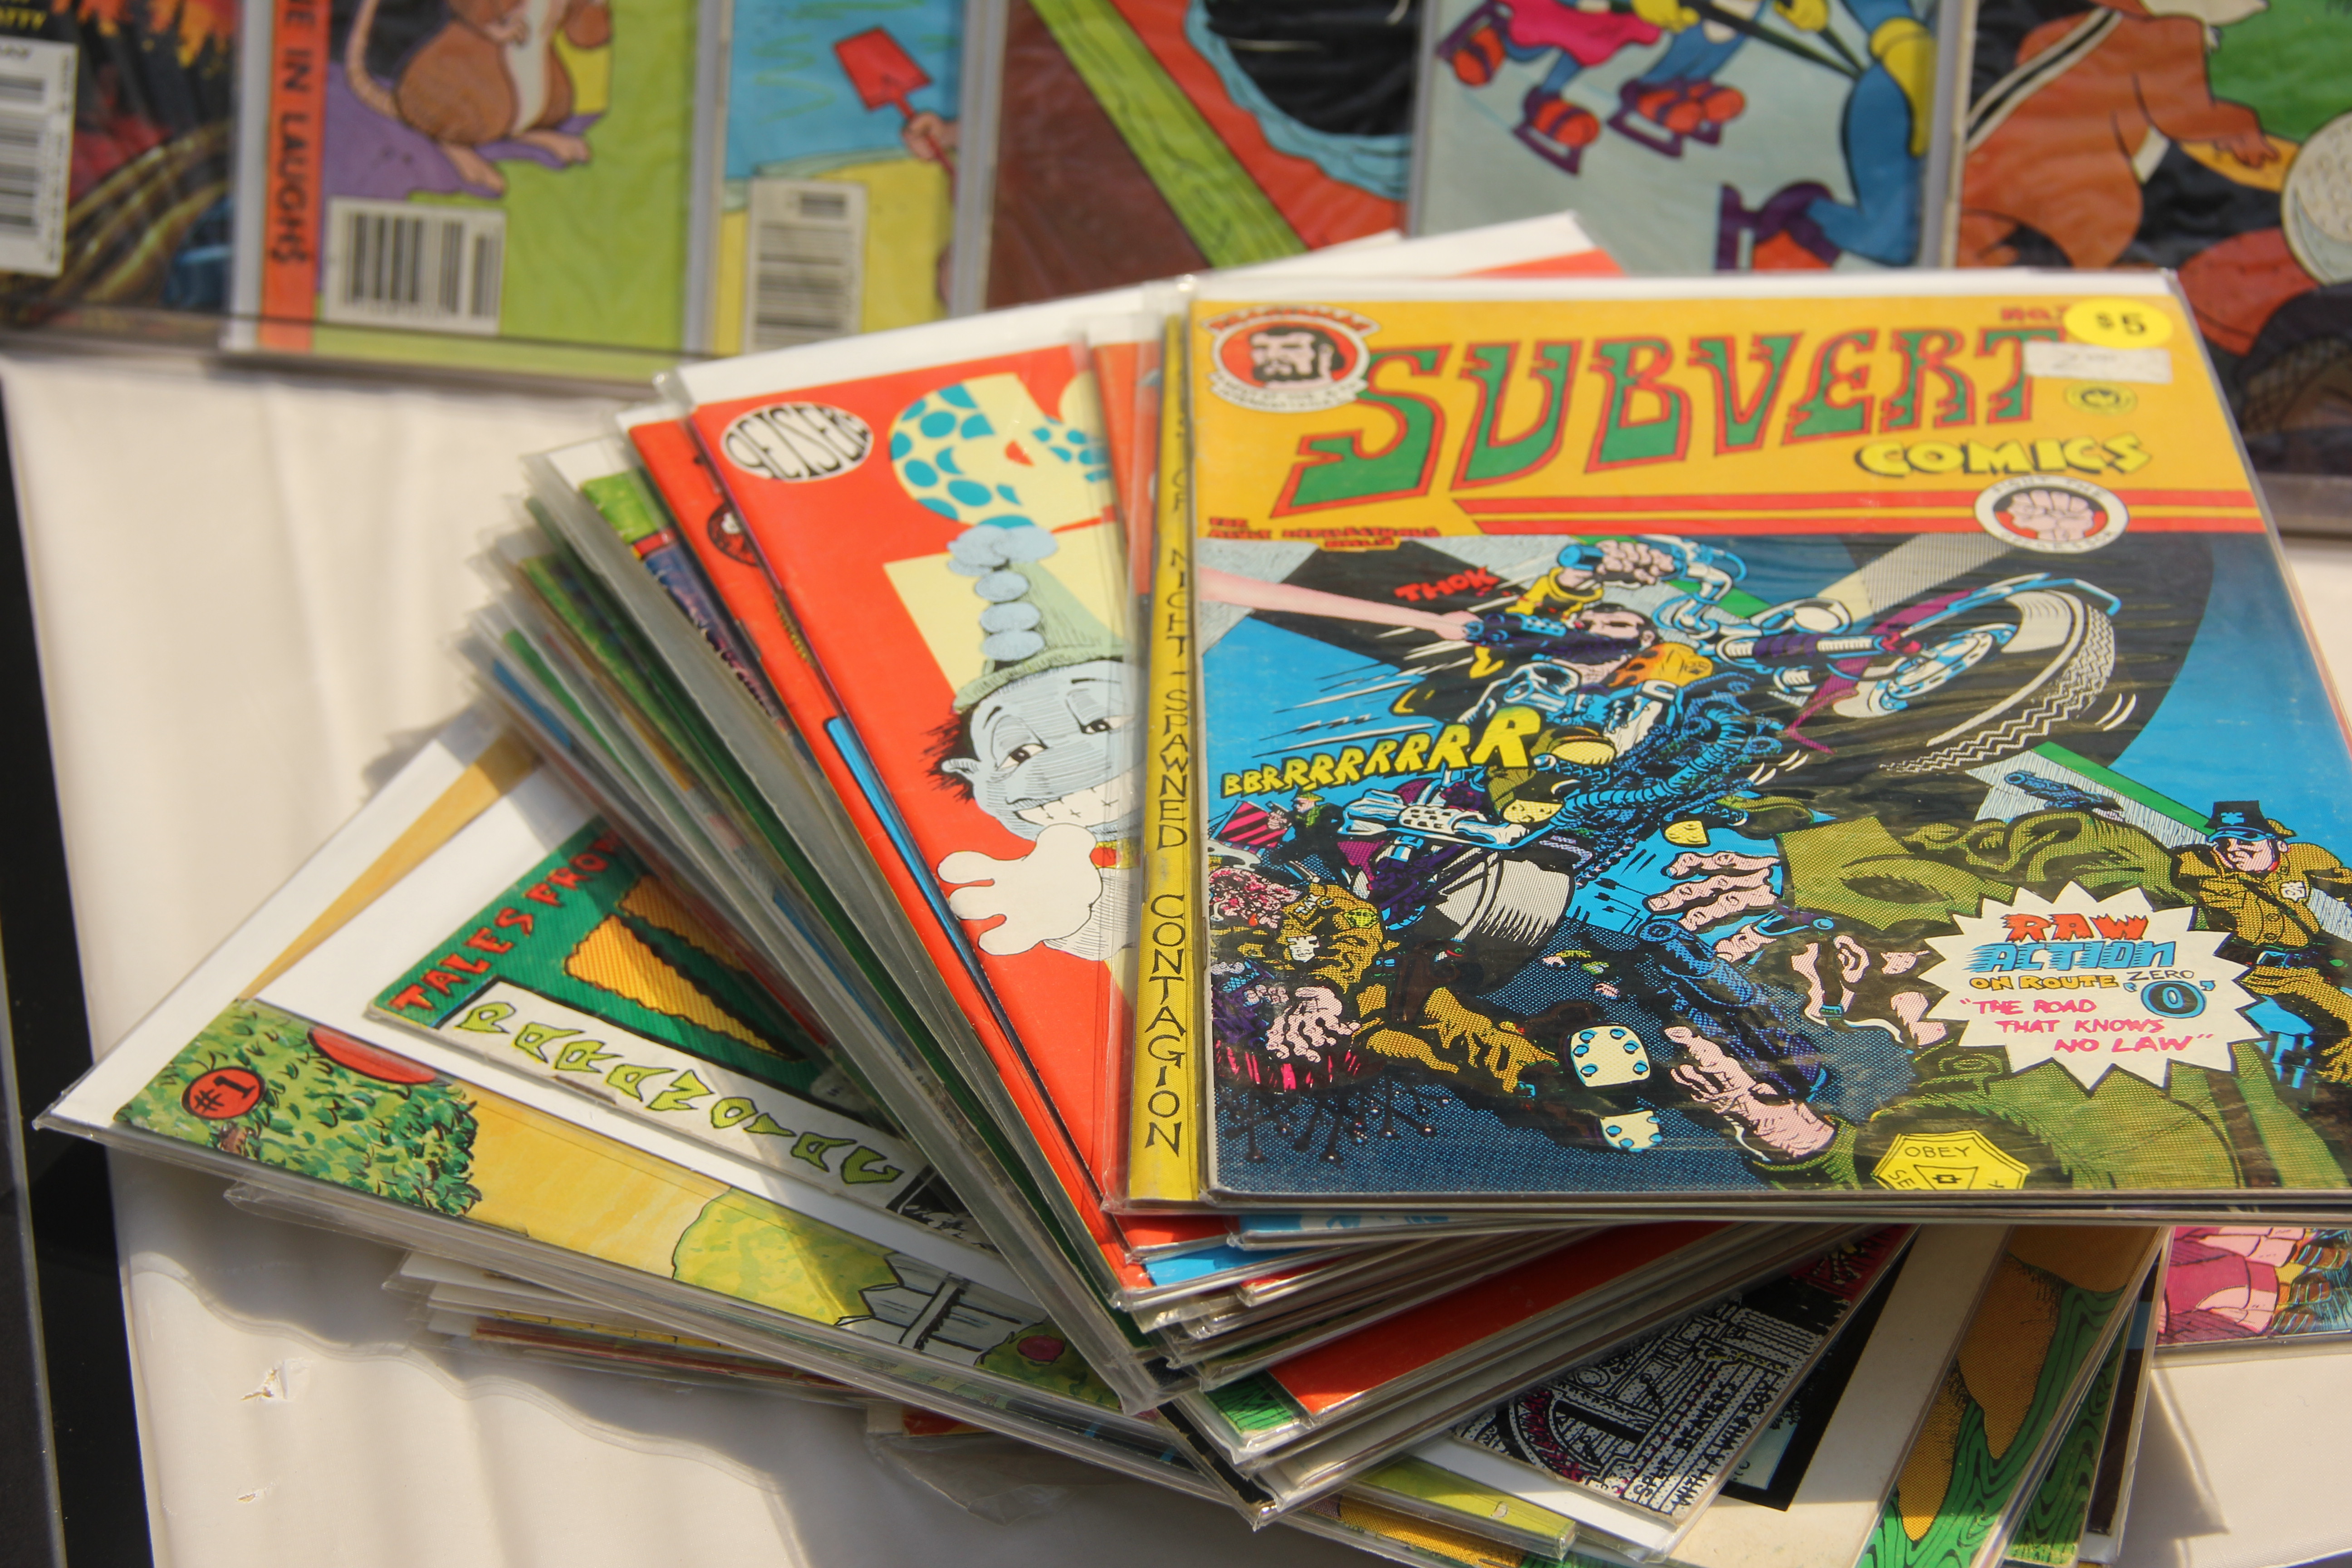 Photo: Comic books displayed at ComiCulture at UHCL. Photo by The Signal reporter Berenice Webster.